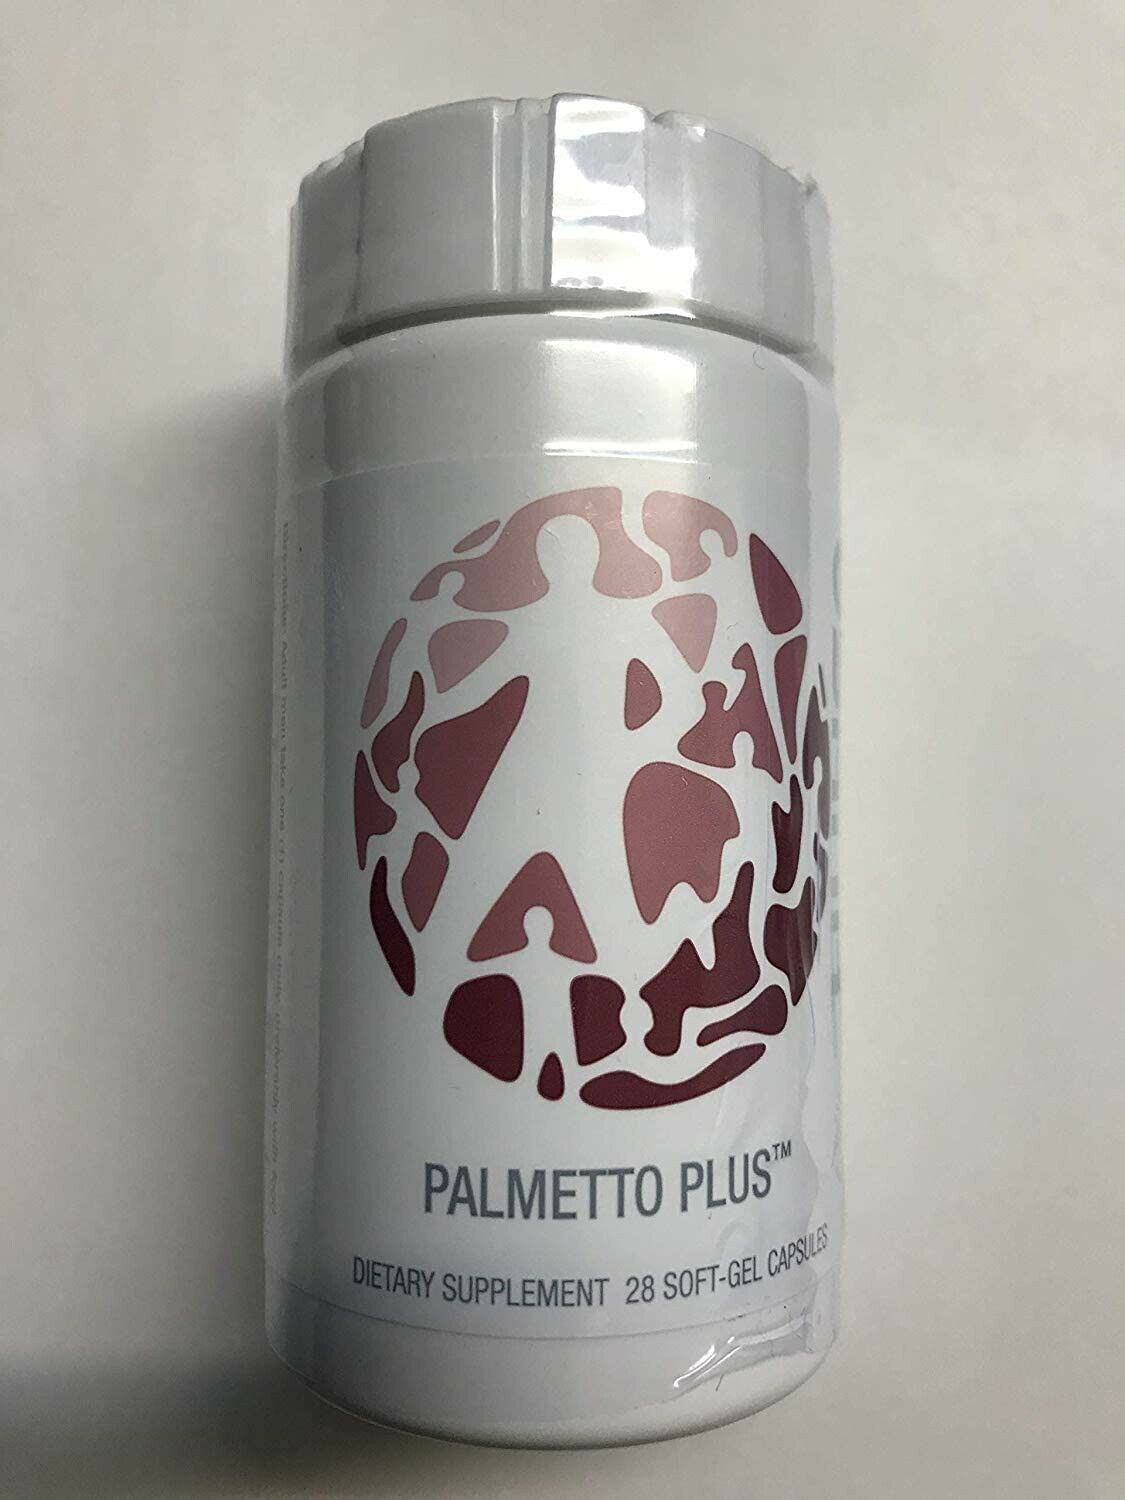 3 bottles USANA Palmetto Plus supplement for men supports prostate health NEW